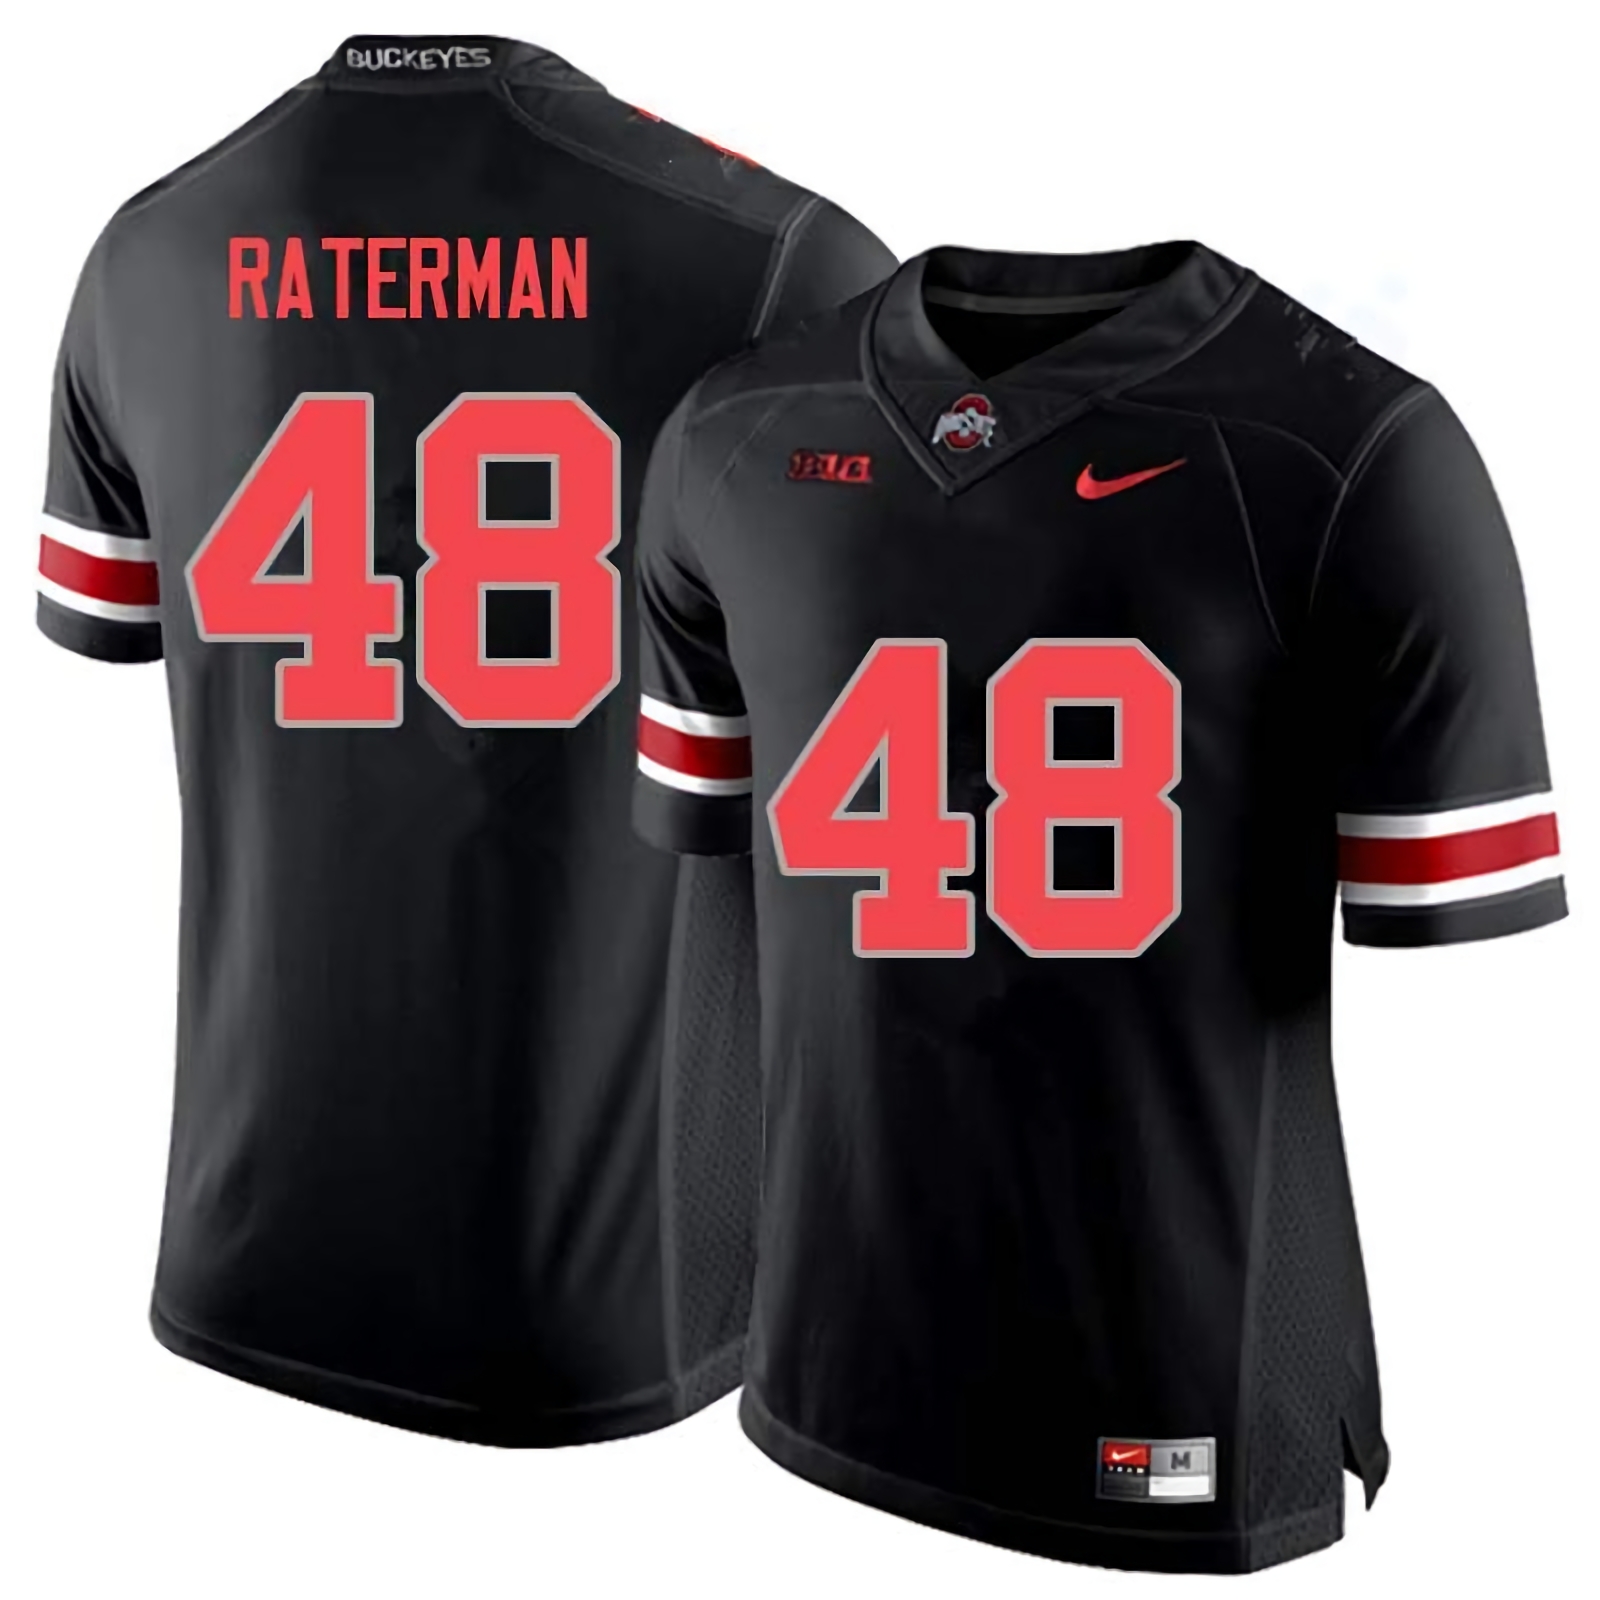 Clay Raterman Ohio State Buckeyes Men's NCAA #48 Nike Blackout College Stitched Football Jersey GFJ3256FY